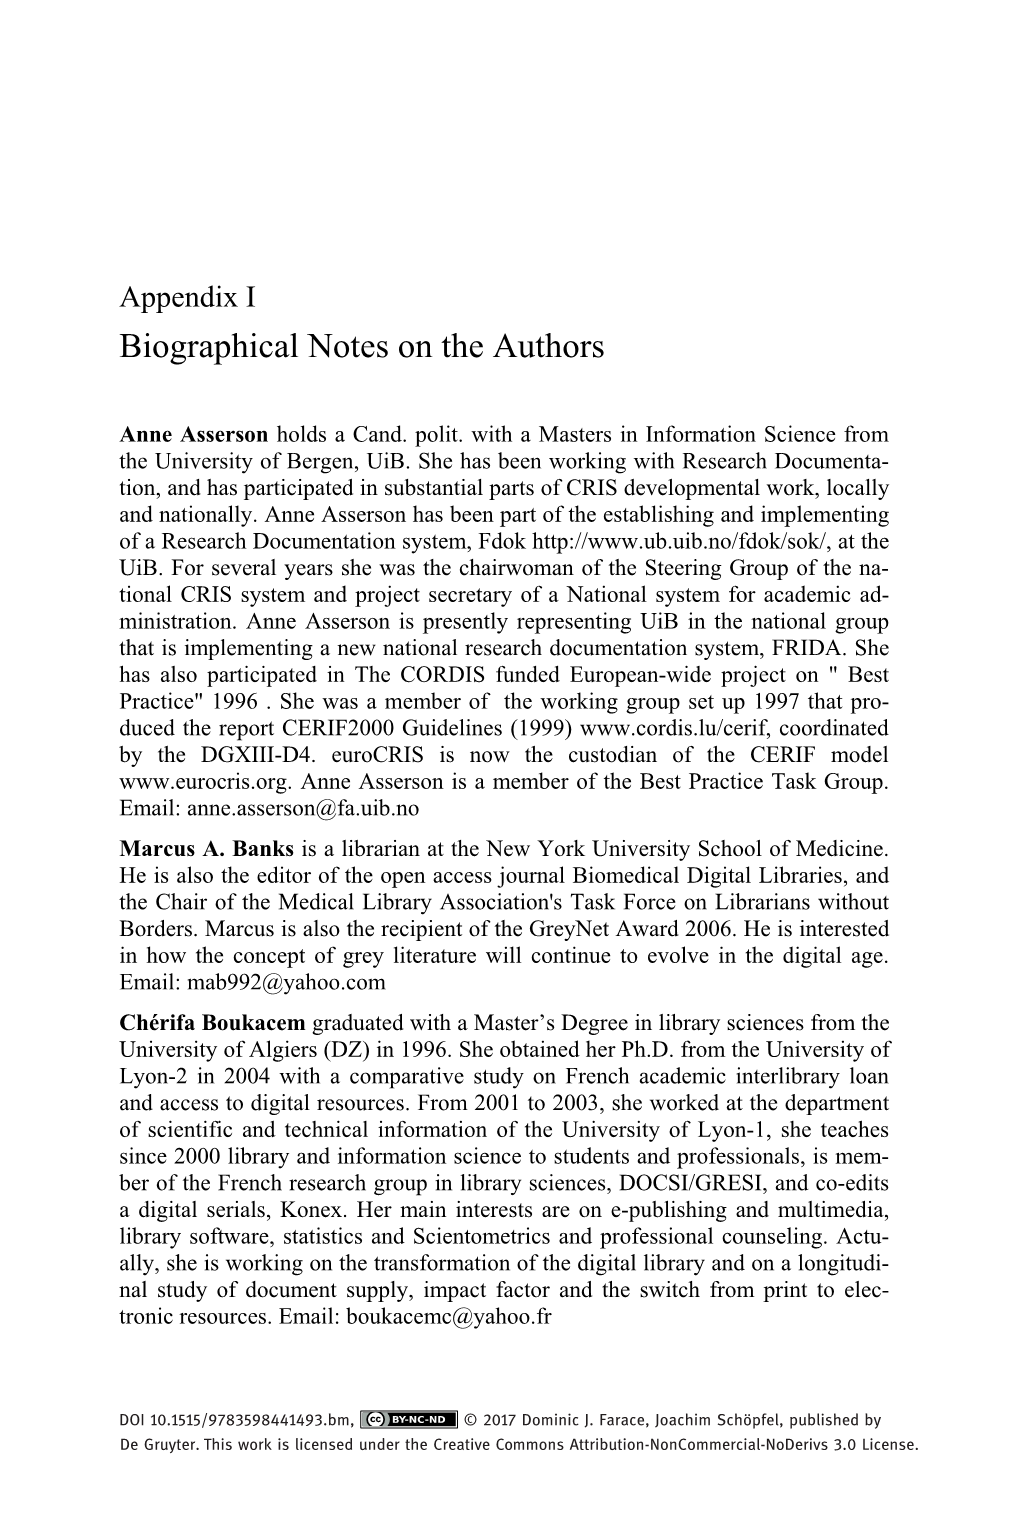 Biographical Notes on the Authors